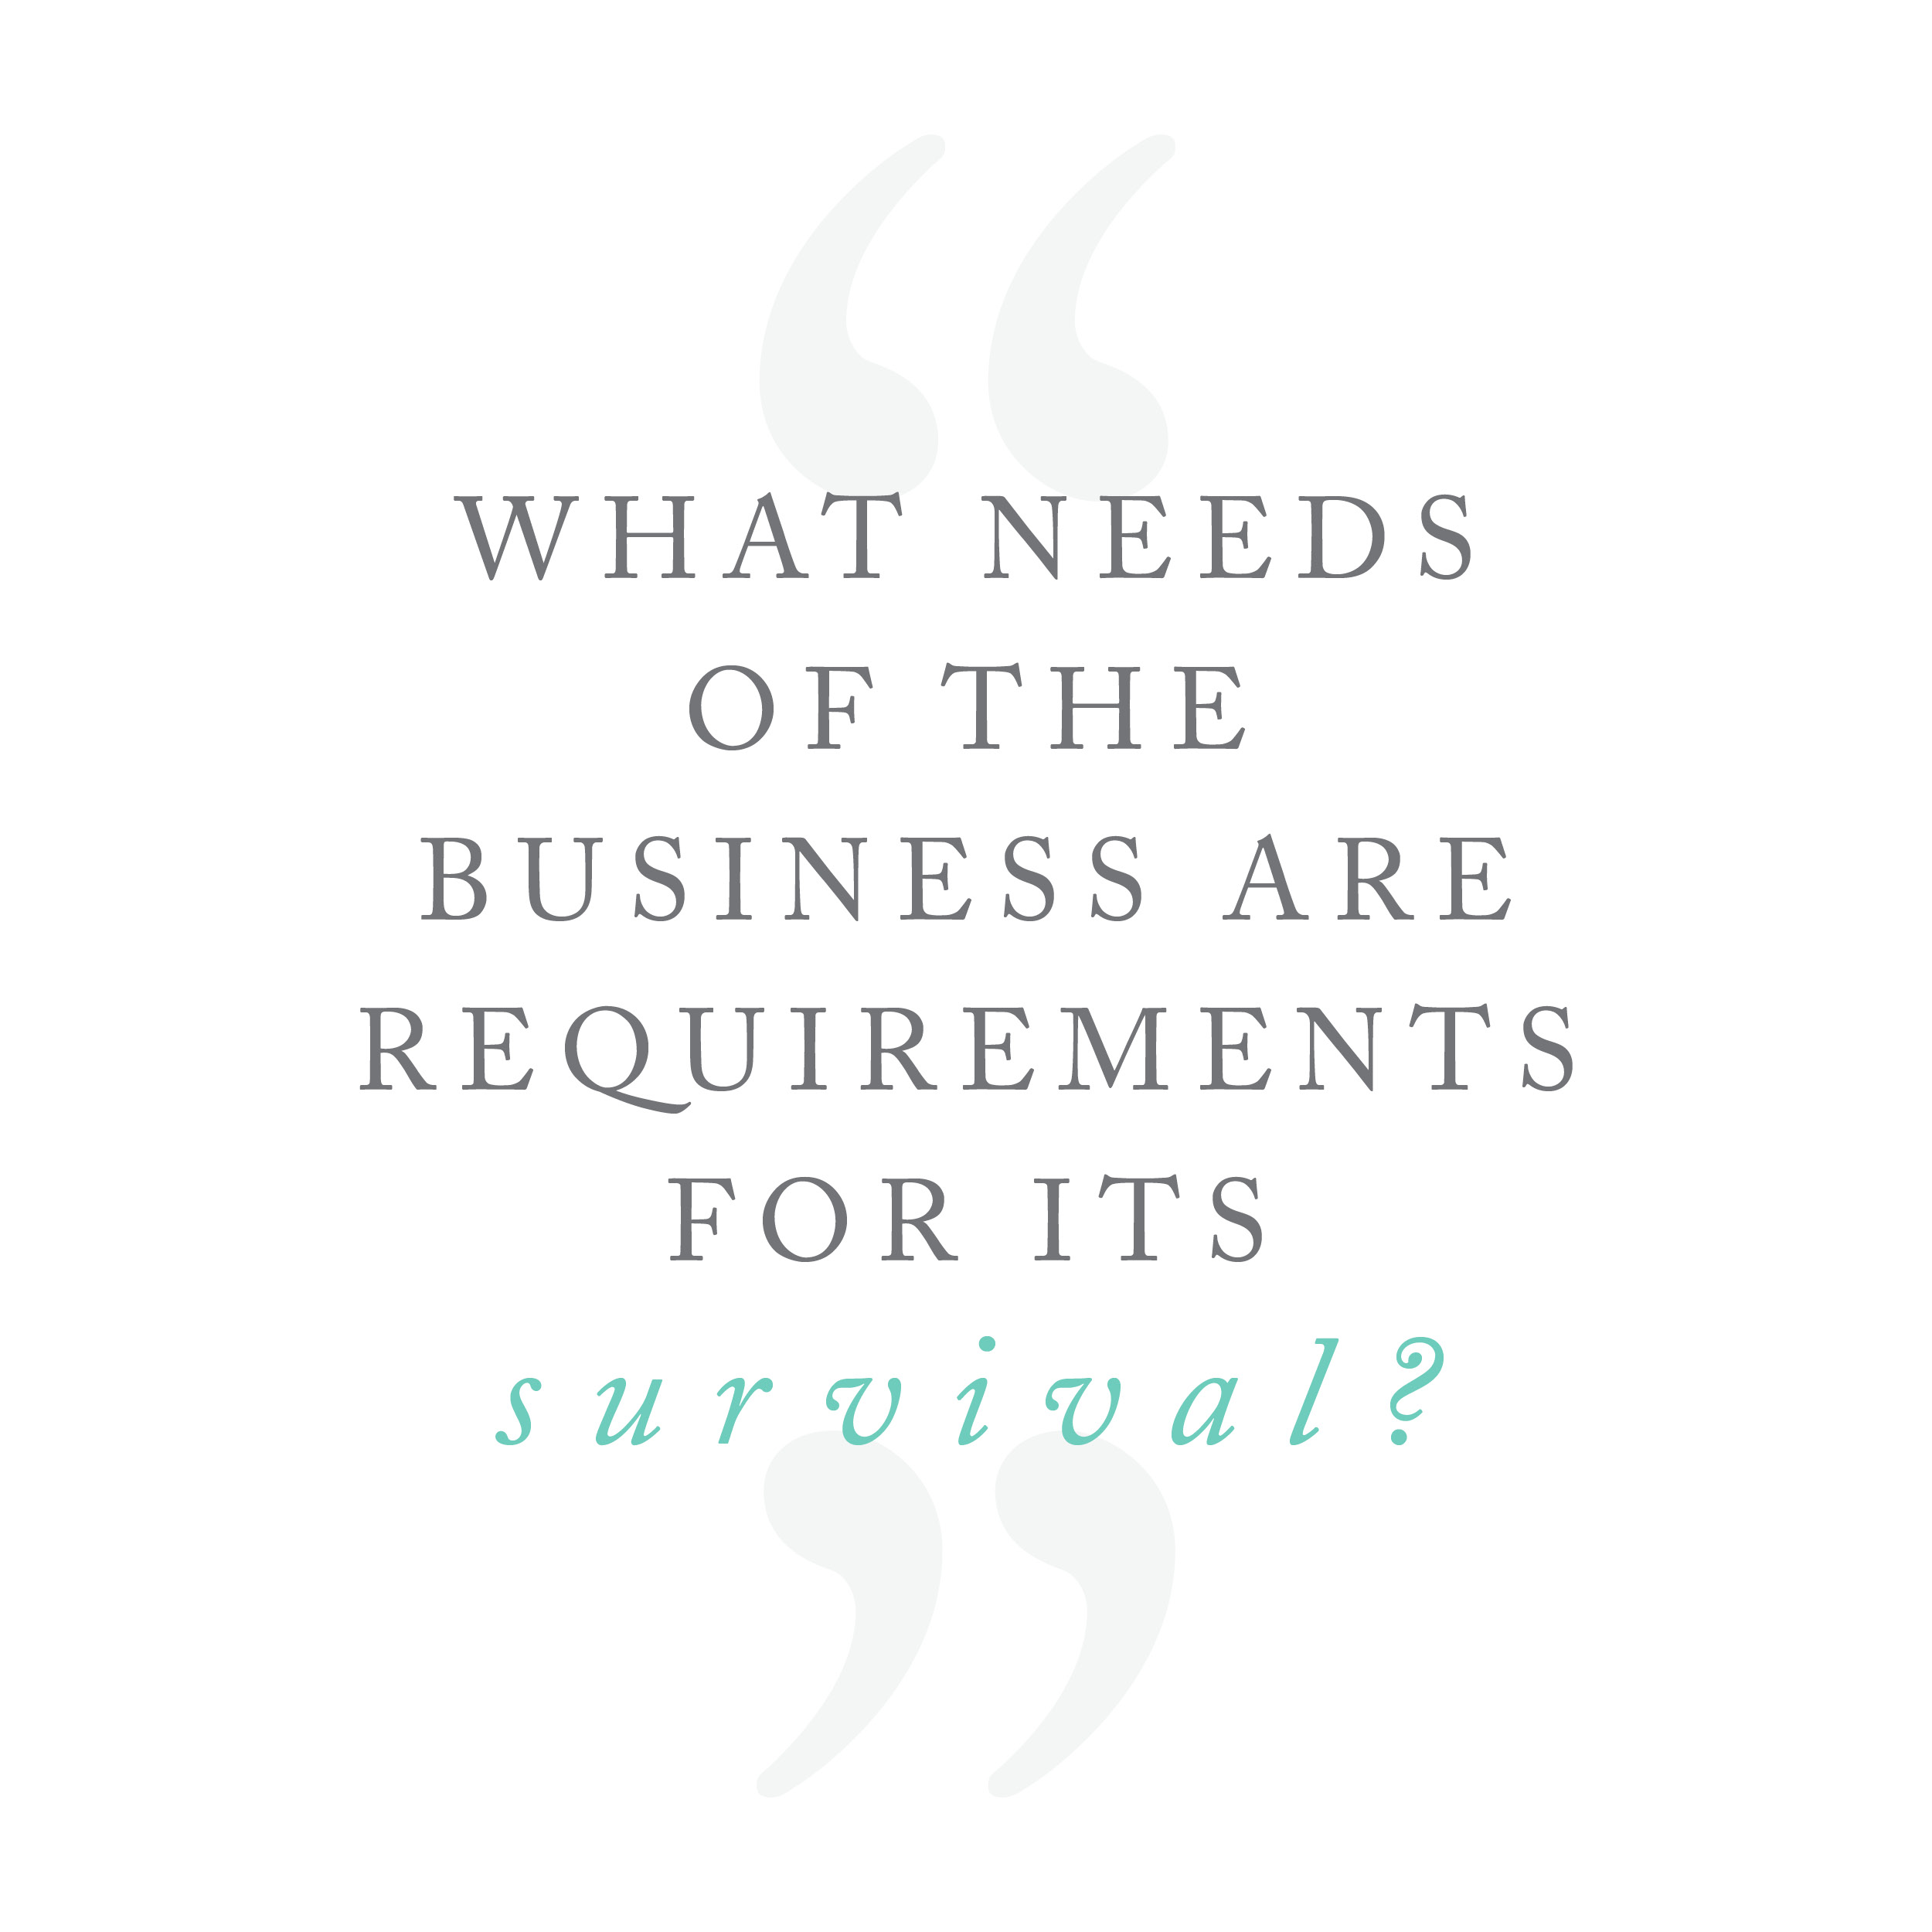 What needs of the business are requirements for its survival?